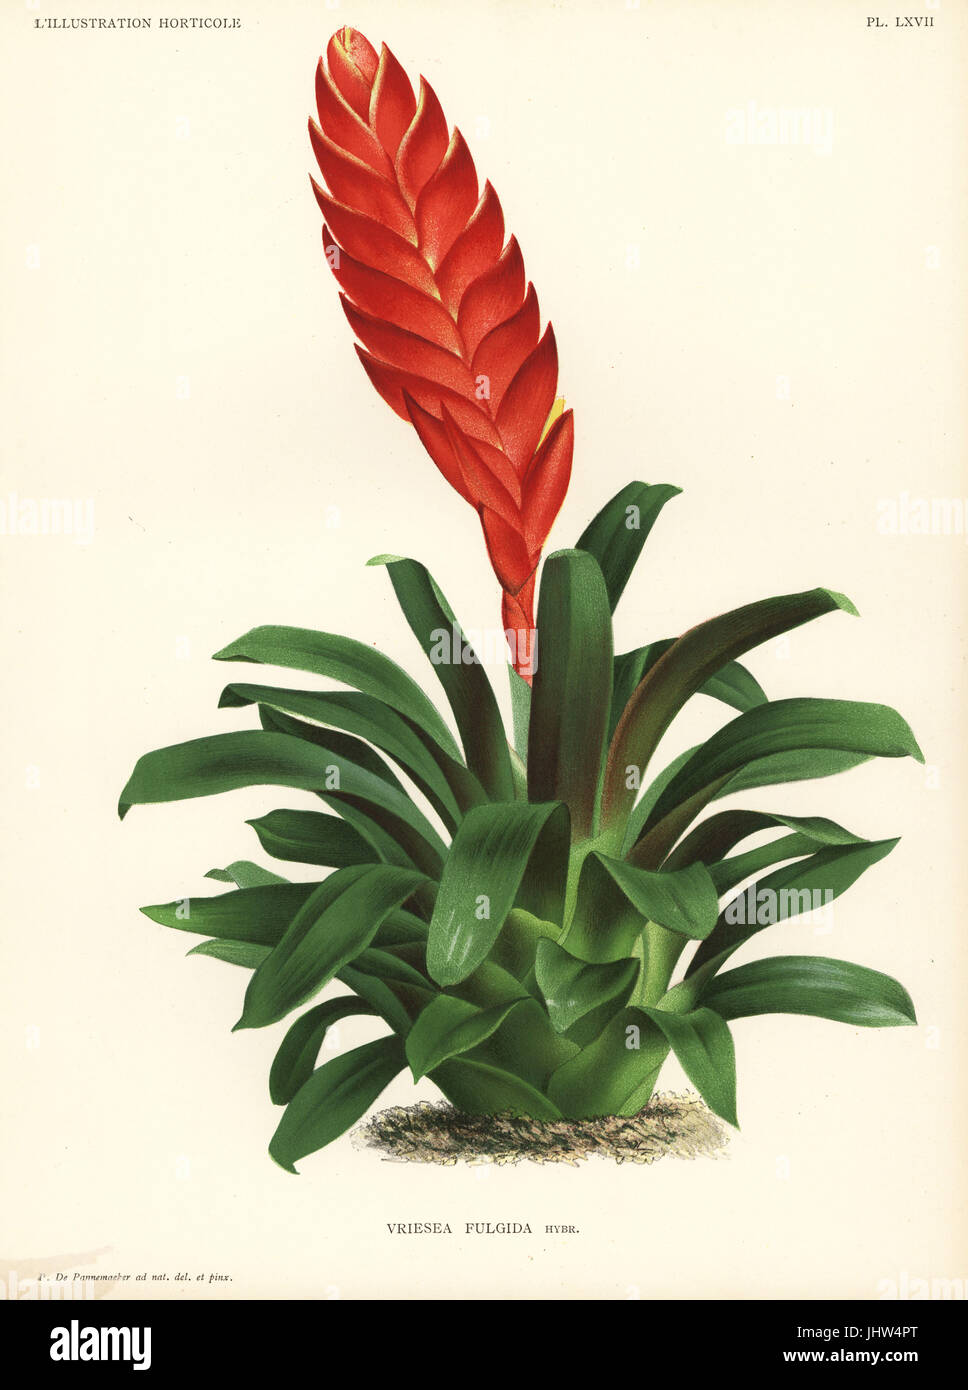 Duval's vriesea, Vriesea duvaliana, hybrid produced by L. Duval from Vriesea carinata x Vriesea brachystachys. Drawn and chromolithographed by Pieter de Pannemaeker from Jean Linden's l'Illustration Horticole, Brussels, 1888. Stock Photo